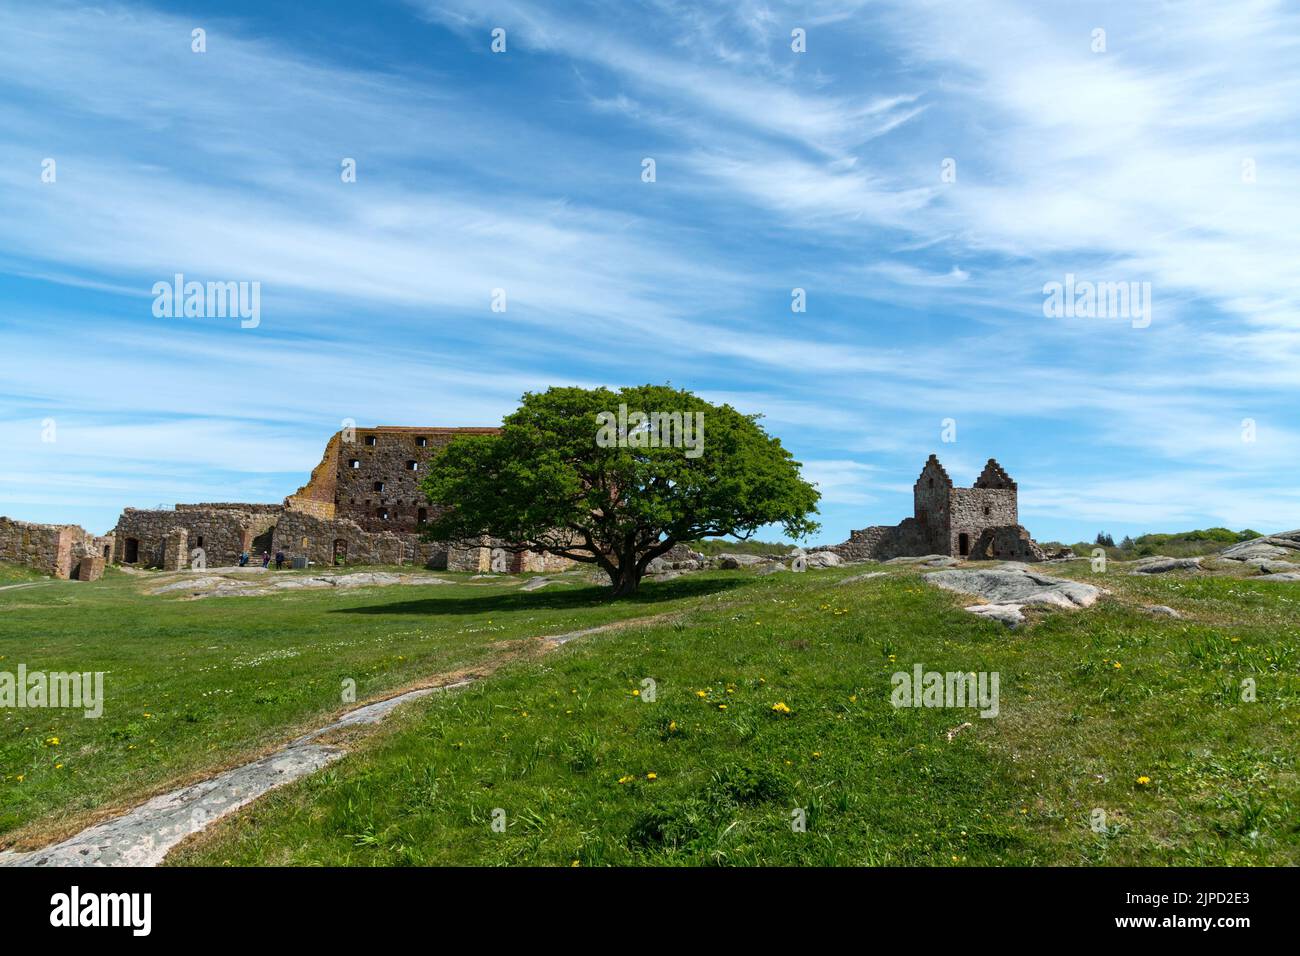 Hammershus is a medieval fortification on the northern tip of the Danish island of Bornholm. Stock Photo